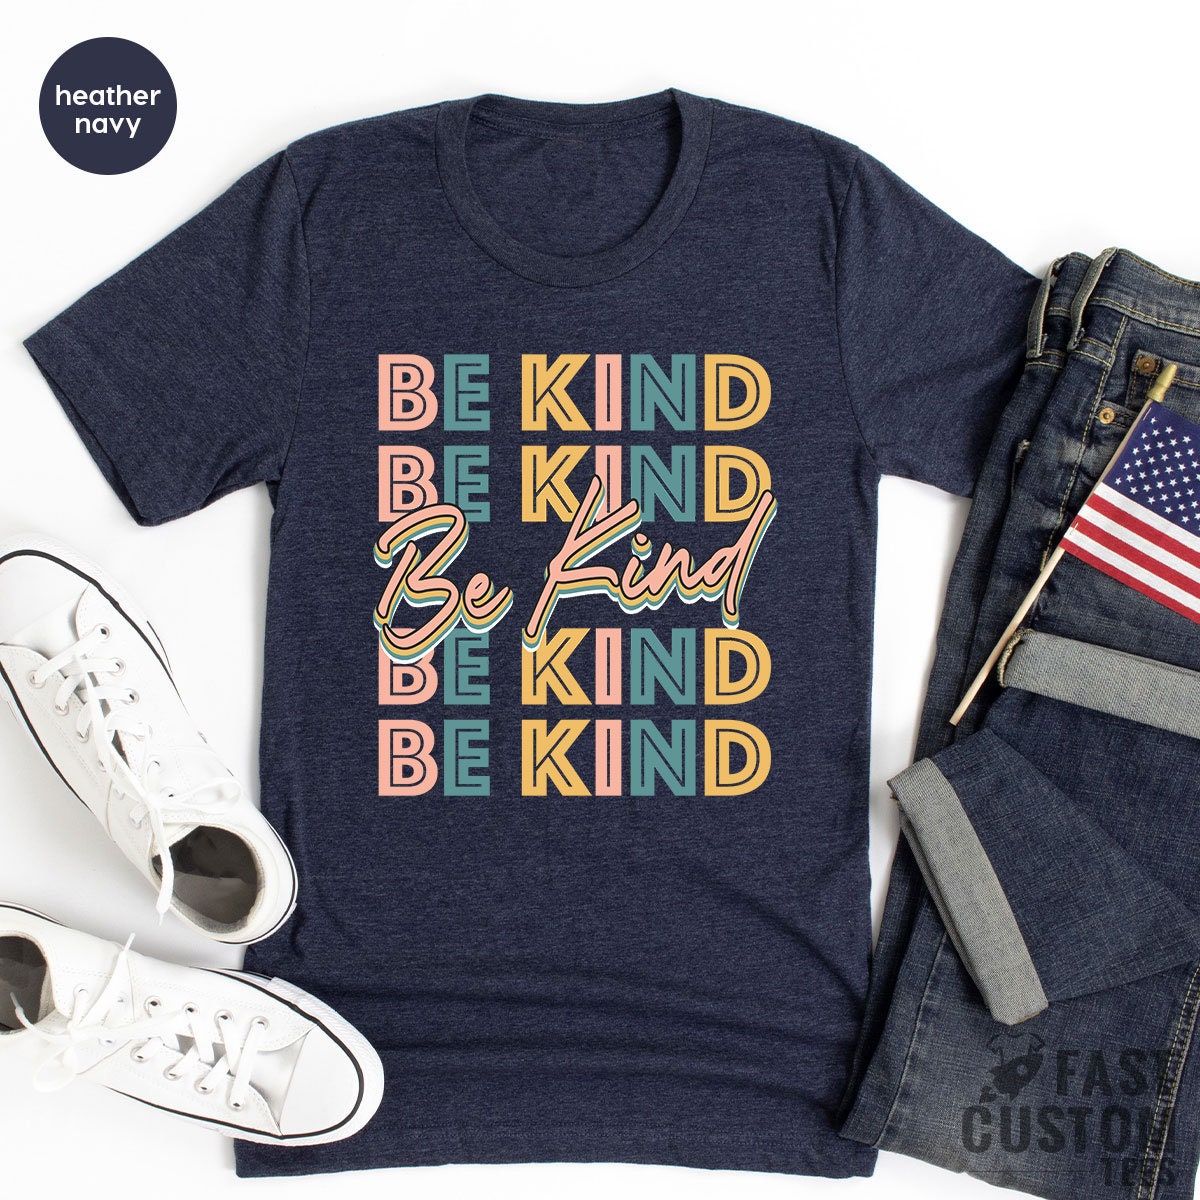 Be Kind Shirt, Positive Quote T Shirt, Inspirational TShirt, Kind Heart T-Shirt, Gifts For Women, Kindness Shirt, Motivational Outfits - Fastdeliverytees.com